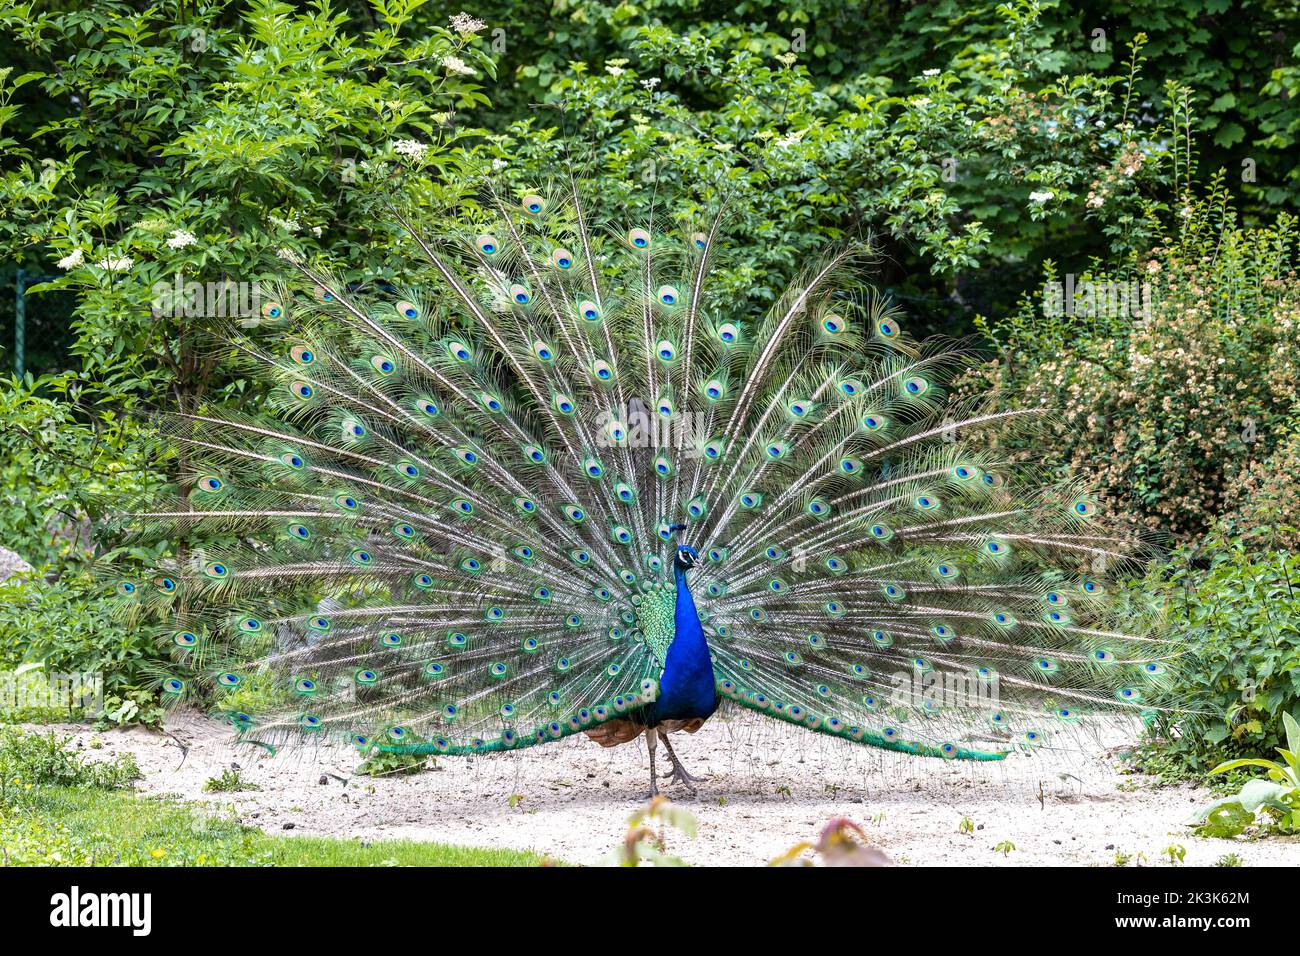 The Indian peafowl or blue peafowl, Pavo cristatus is a large and brightly coloured bird, is a species of peafowl native to South Asia, but introduced Stock Photo